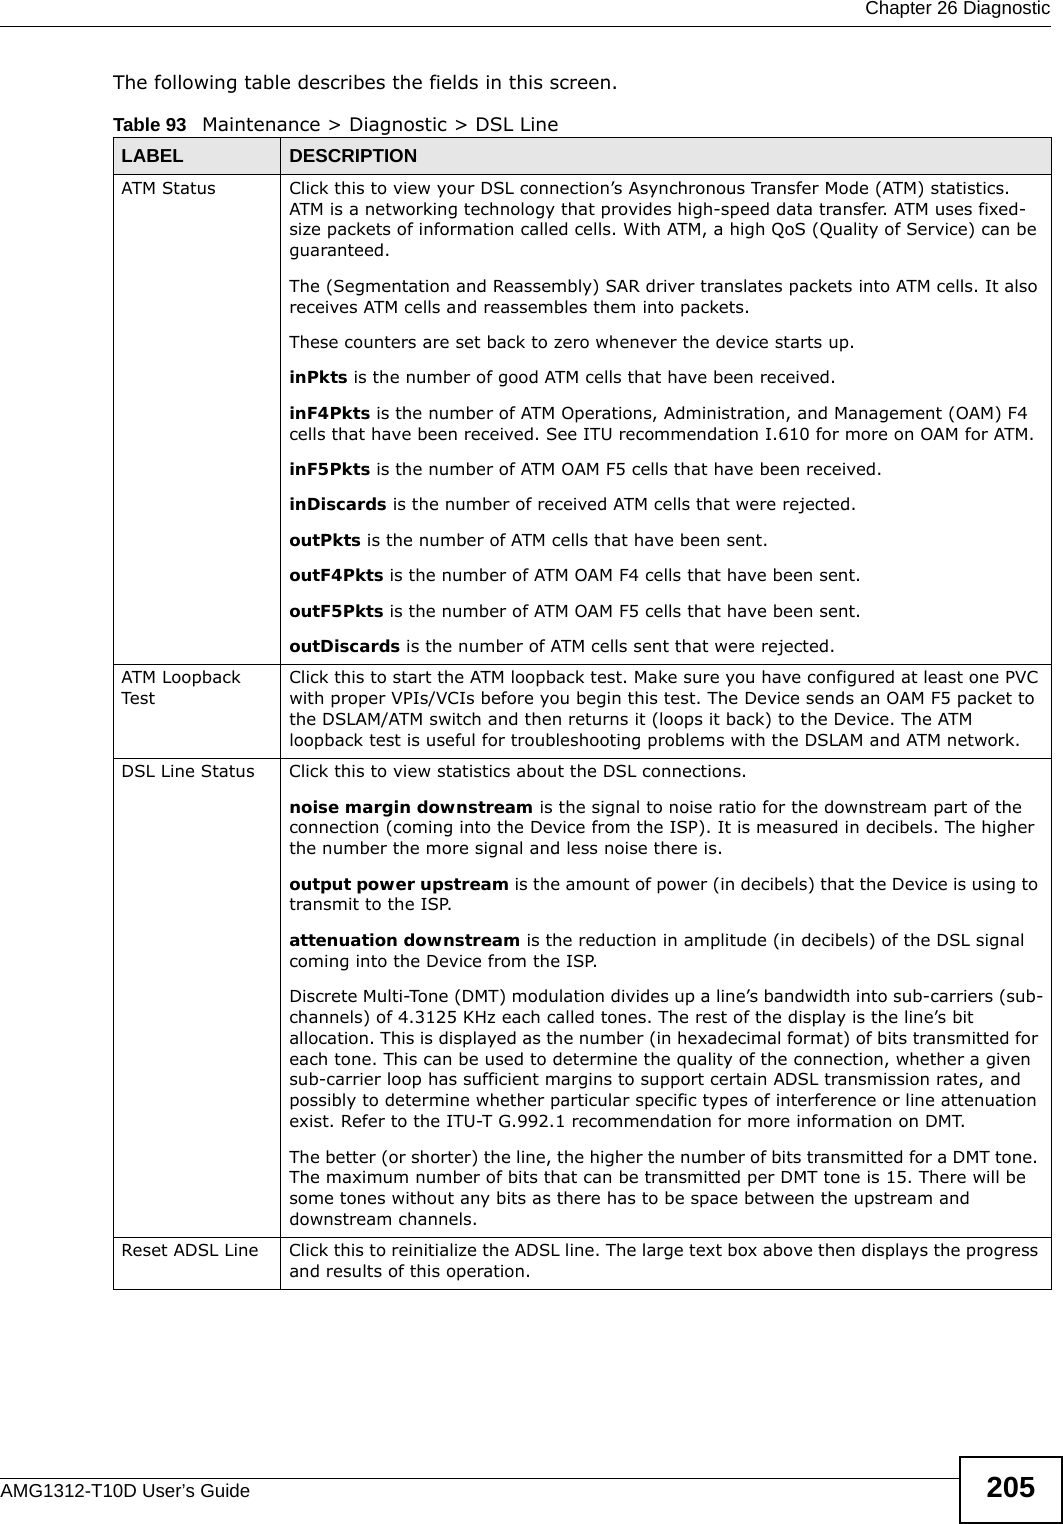  Chapter 26 DiagnosticAMG1312-T10D User’s Guide 205The following table describes the fields in this screen.  Table 93   Maintenance &gt; Diagnostic &gt; DSL LineLABEL DESCRIPTIONATM Status Click this to view your DSL connection’s Asynchronous Transfer Mode (ATM) statistics. ATM is a networking technology that provides high-speed data transfer. ATM uses fixed-size packets of information called cells. With ATM, a high QoS (Quality of Service) can be guaranteed. The (Segmentation and Reassembly) SAR driver translates packets into ATM cells. It also receives ATM cells and reassembles them into packets.These counters are set back to zero whenever the device starts up.inPkts is the number of good ATM cells that have been received.inF4Pkts is the number of ATM Operations, Administration, and Management (OAM) F4 cells that have been received. See ITU recommendation I.610 for more on OAM for ATM.inF5Pkts is the number of ATM OAM F5 cells that have been received.inDiscards is the number of received ATM cells that were rejected.outPkts is the number of ATM cells that have been sent.outF4Pkts is the number of ATM OAM F4 cells that have been sent. outF5Pkts is the number of ATM OAM F5 cells that have been sent.outDiscards is the number of ATM cells sent that were rejected.ATM Loopback TestClick this to start the ATM loopback test. Make sure you have configured at least one PVC with proper VPIs/VCIs before you begin this test. The Device sends an OAM F5 packet to the DSLAM/ATM switch and then returns it (loops it back) to the Device. The ATM loopback test is useful for troubleshooting problems with the DSLAM and ATM network.DSL Line Status Click this to view statistics about the DSL connections.noise margin downstream is the signal to noise ratio for the downstream part of the connection (coming into the Device from the ISP). It is measured in decibels. The higher the number the more signal and less noise there is. output power upstream is the amount of power (in decibels) that the Device is using to transmit to the ISP.attenuation downstream is the reduction in amplitude (in decibels) of the DSL signal coming into the Device from the ISP.Discrete Multi-Tone (DMT) modulation divides up a line’s bandwidth into sub-carriers (sub-channels) of 4.3125 KHz each called tones. The rest of the display is the line’s bit allocation. This is displayed as the number (in hexadecimal format) of bits transmitted for each tone. This can be used to determine the quality of the connection, whether a given sub-carrier loop has sufficient margins to support certain ADSL transmission rates, and possibly to determine whether particular specific types of interference or line attenuation exist. Refer to the ITU-T G.992.1 recommendation for more information on DMT. The better (or shorter) the line, the higher the number of bits transmitted for a DMT tone. The maximum number of bits that can be transmitted per DMT tone is 15. There will be some tones without any bits as there has to be space between the upstream and downstream channels. Reset ADSL Line Click this to reinitialize the ADSL line. The large text box above then displays the progress and results of this operation.